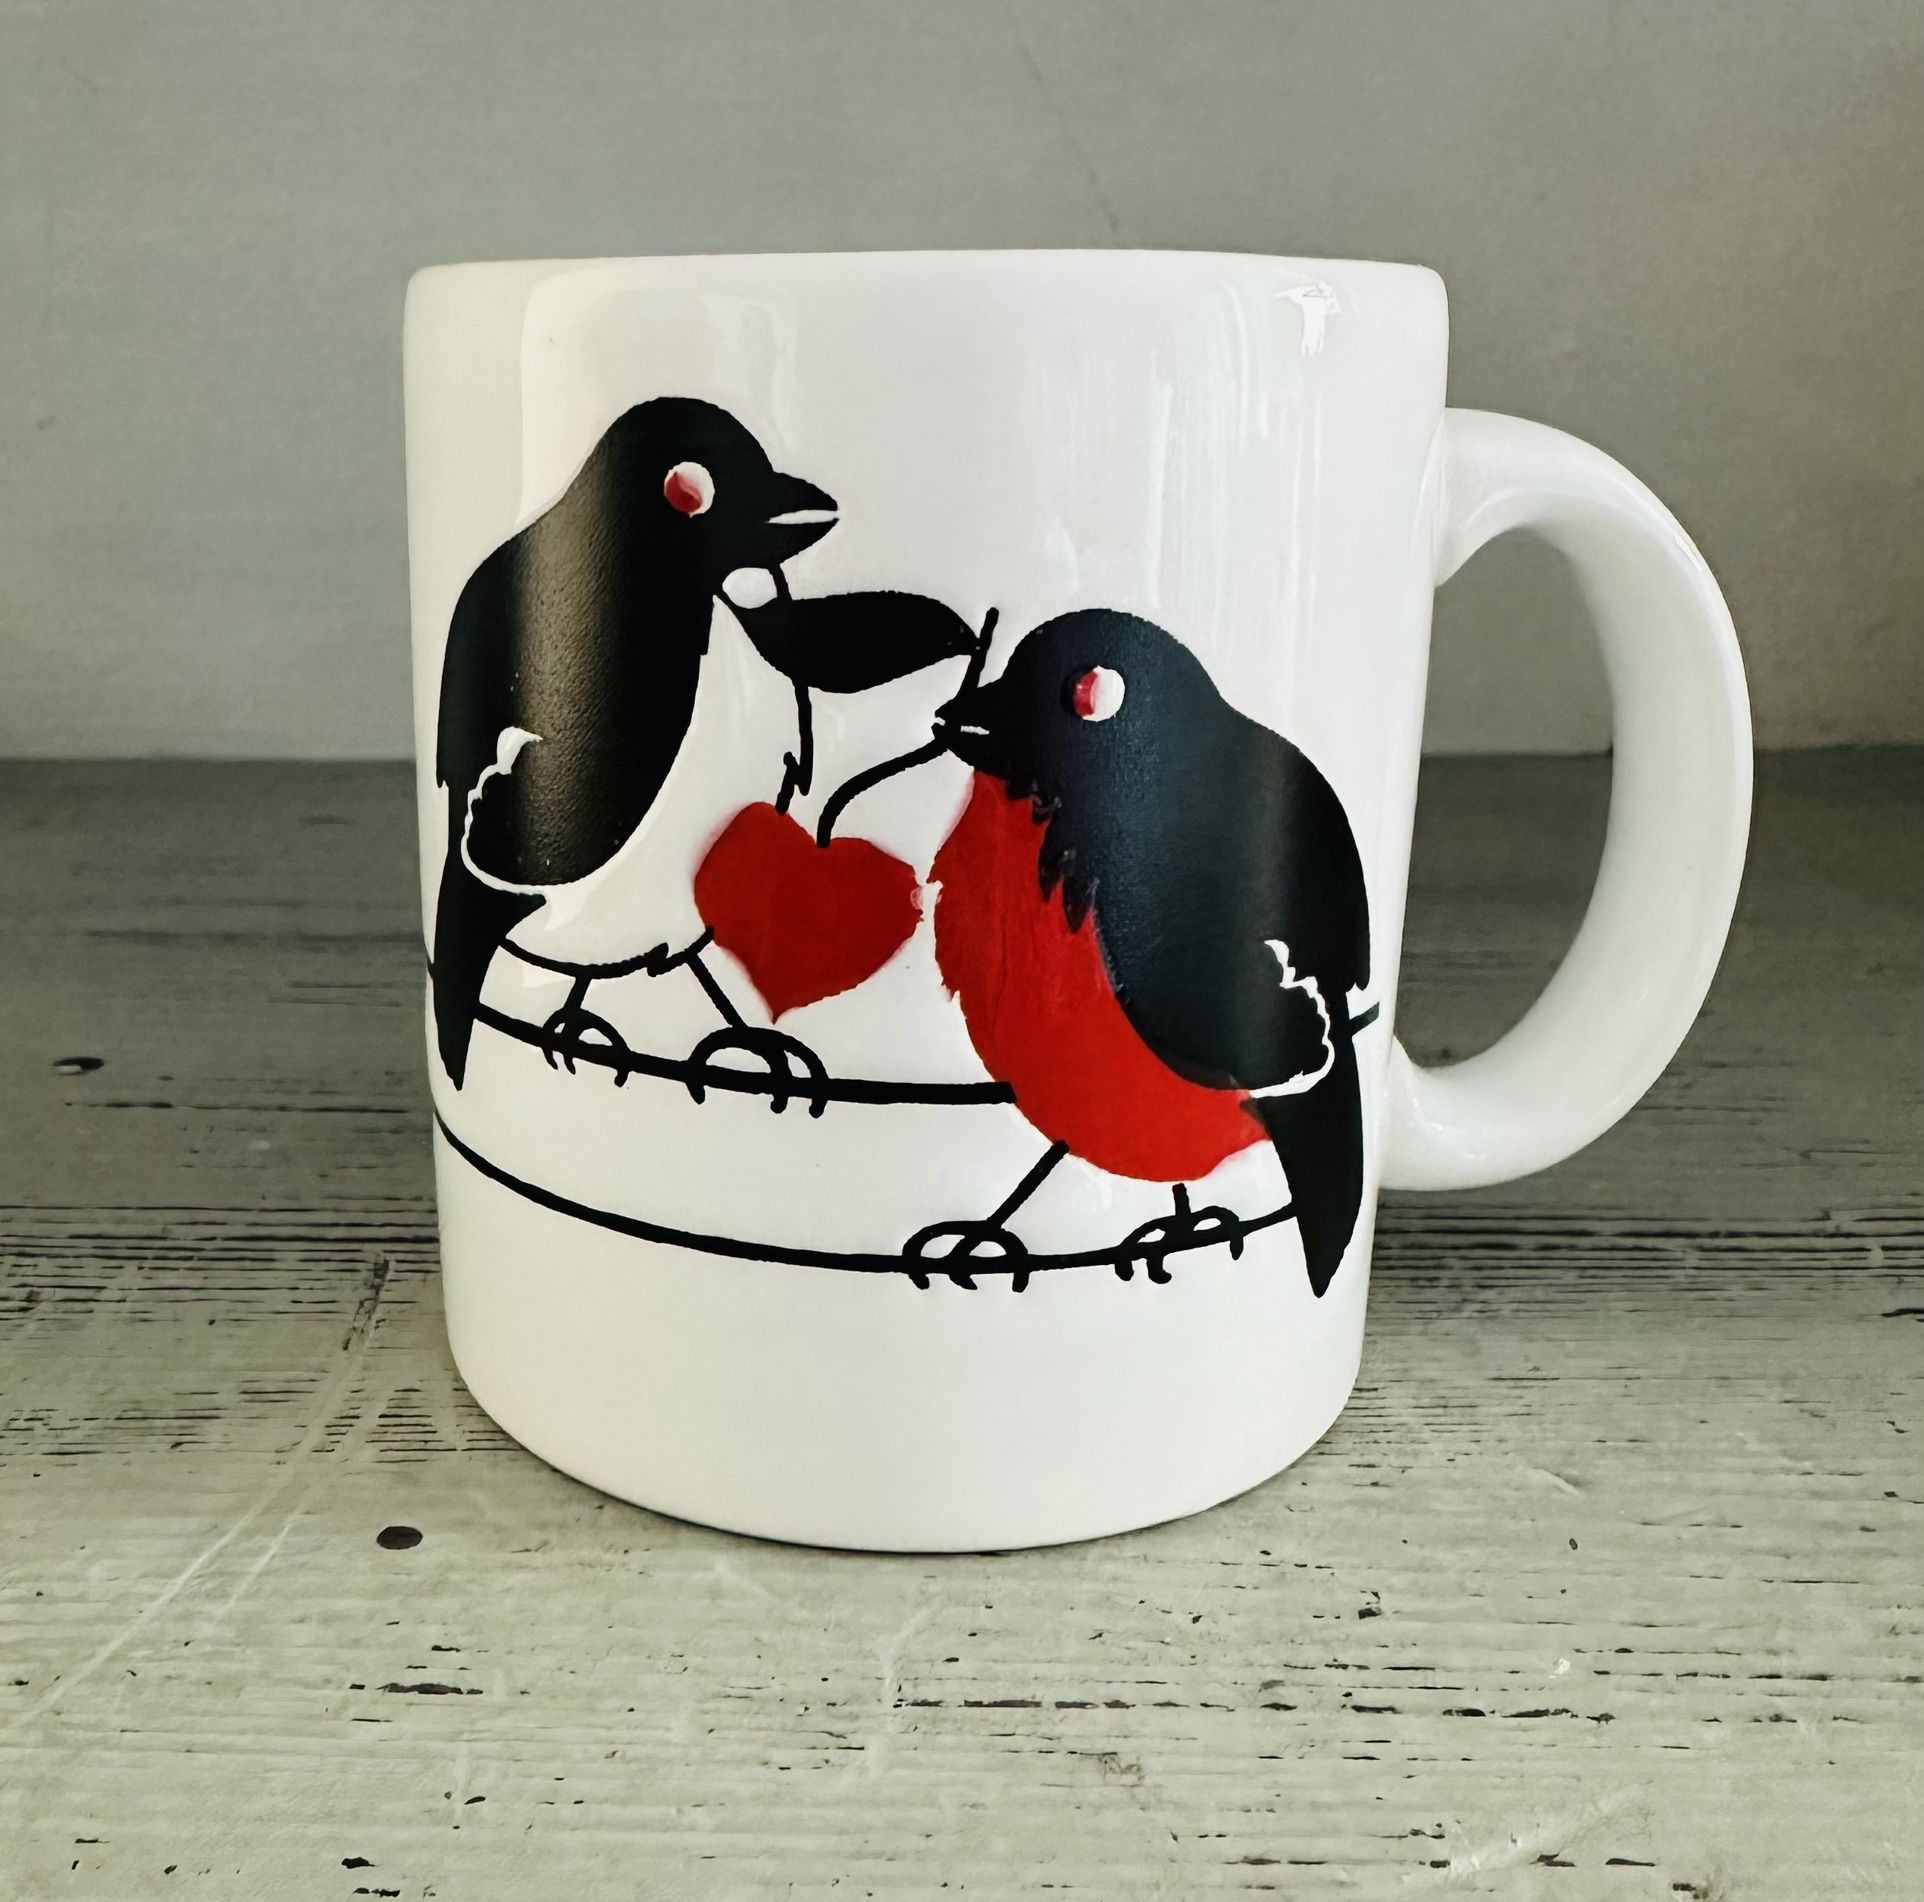  Vintage Waechtersbach West Germany Ceramic Mug  White background with black birds and red heart detail.  Pattern goes all the way around the mug. 